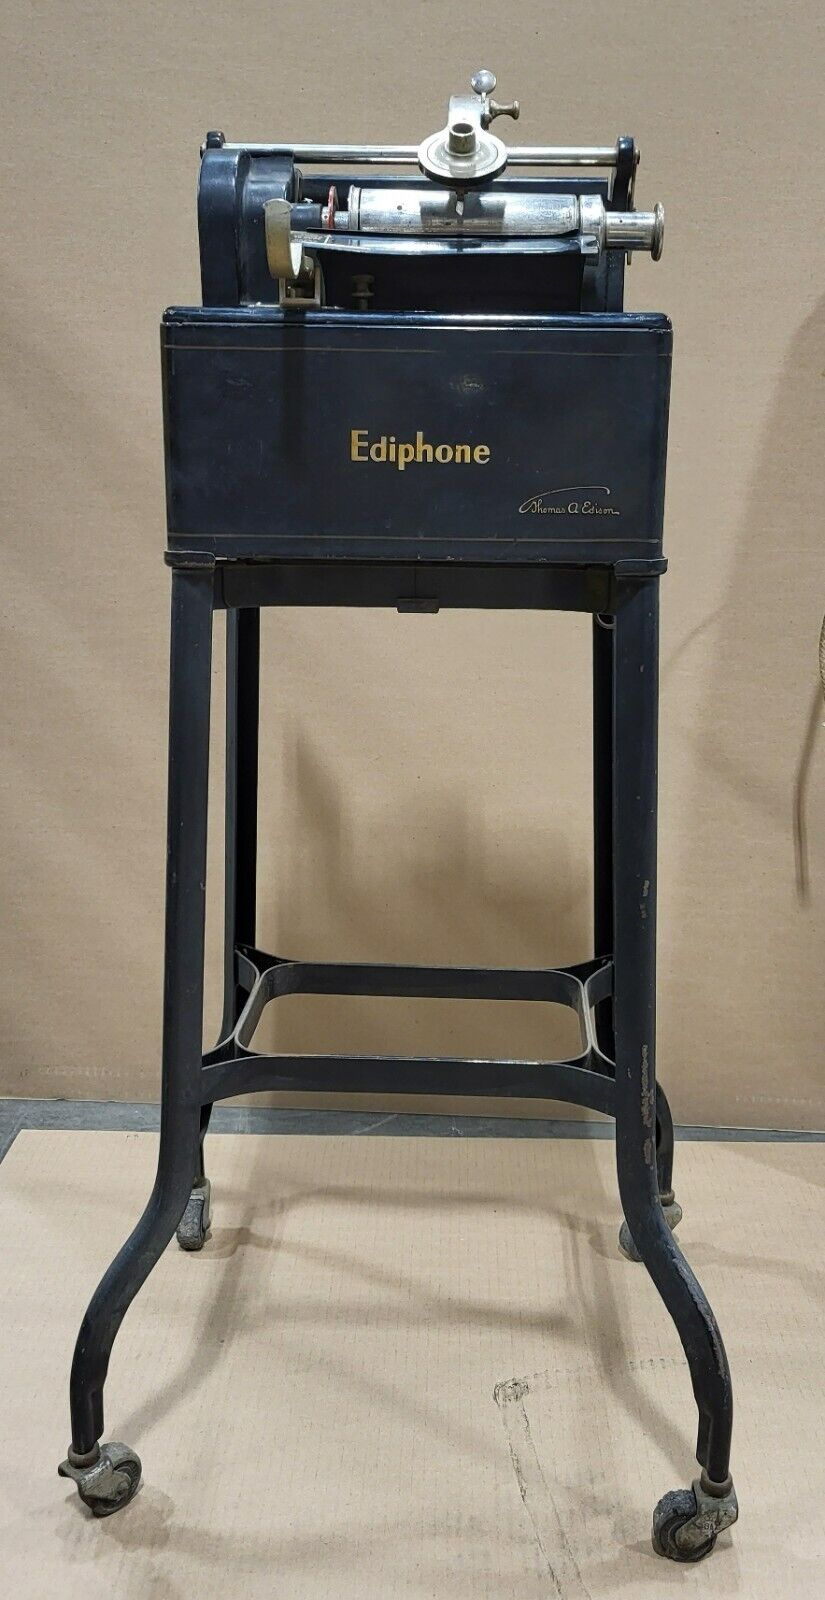 Thomas Edison Ediphone, perfect design piece for a vintage office look